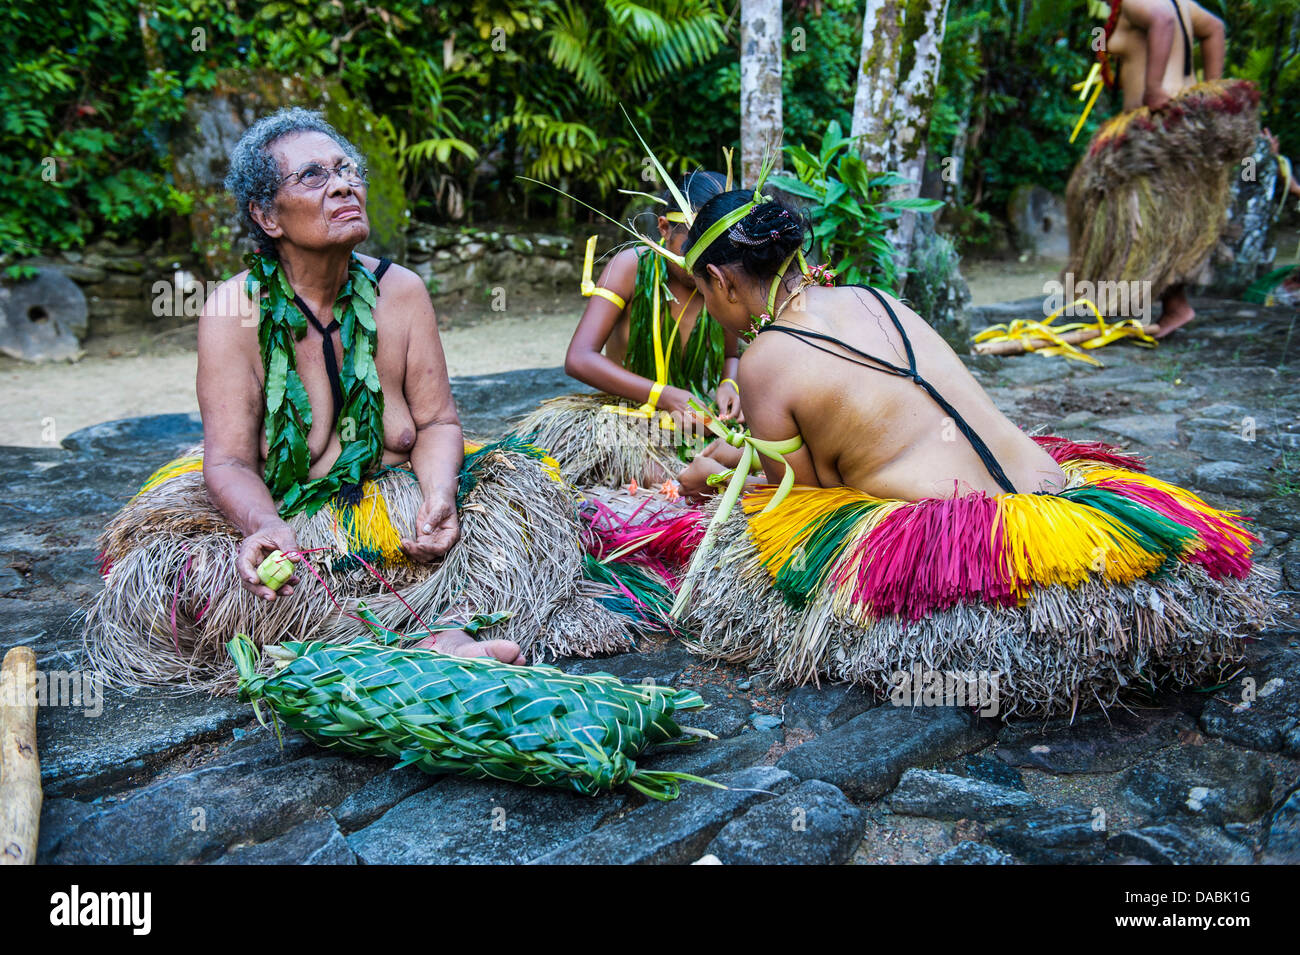 Local islanders practising traditional art work, Island of Yap, Federated States of Micronesia, Caroline Islands, Pacific Stock Photo